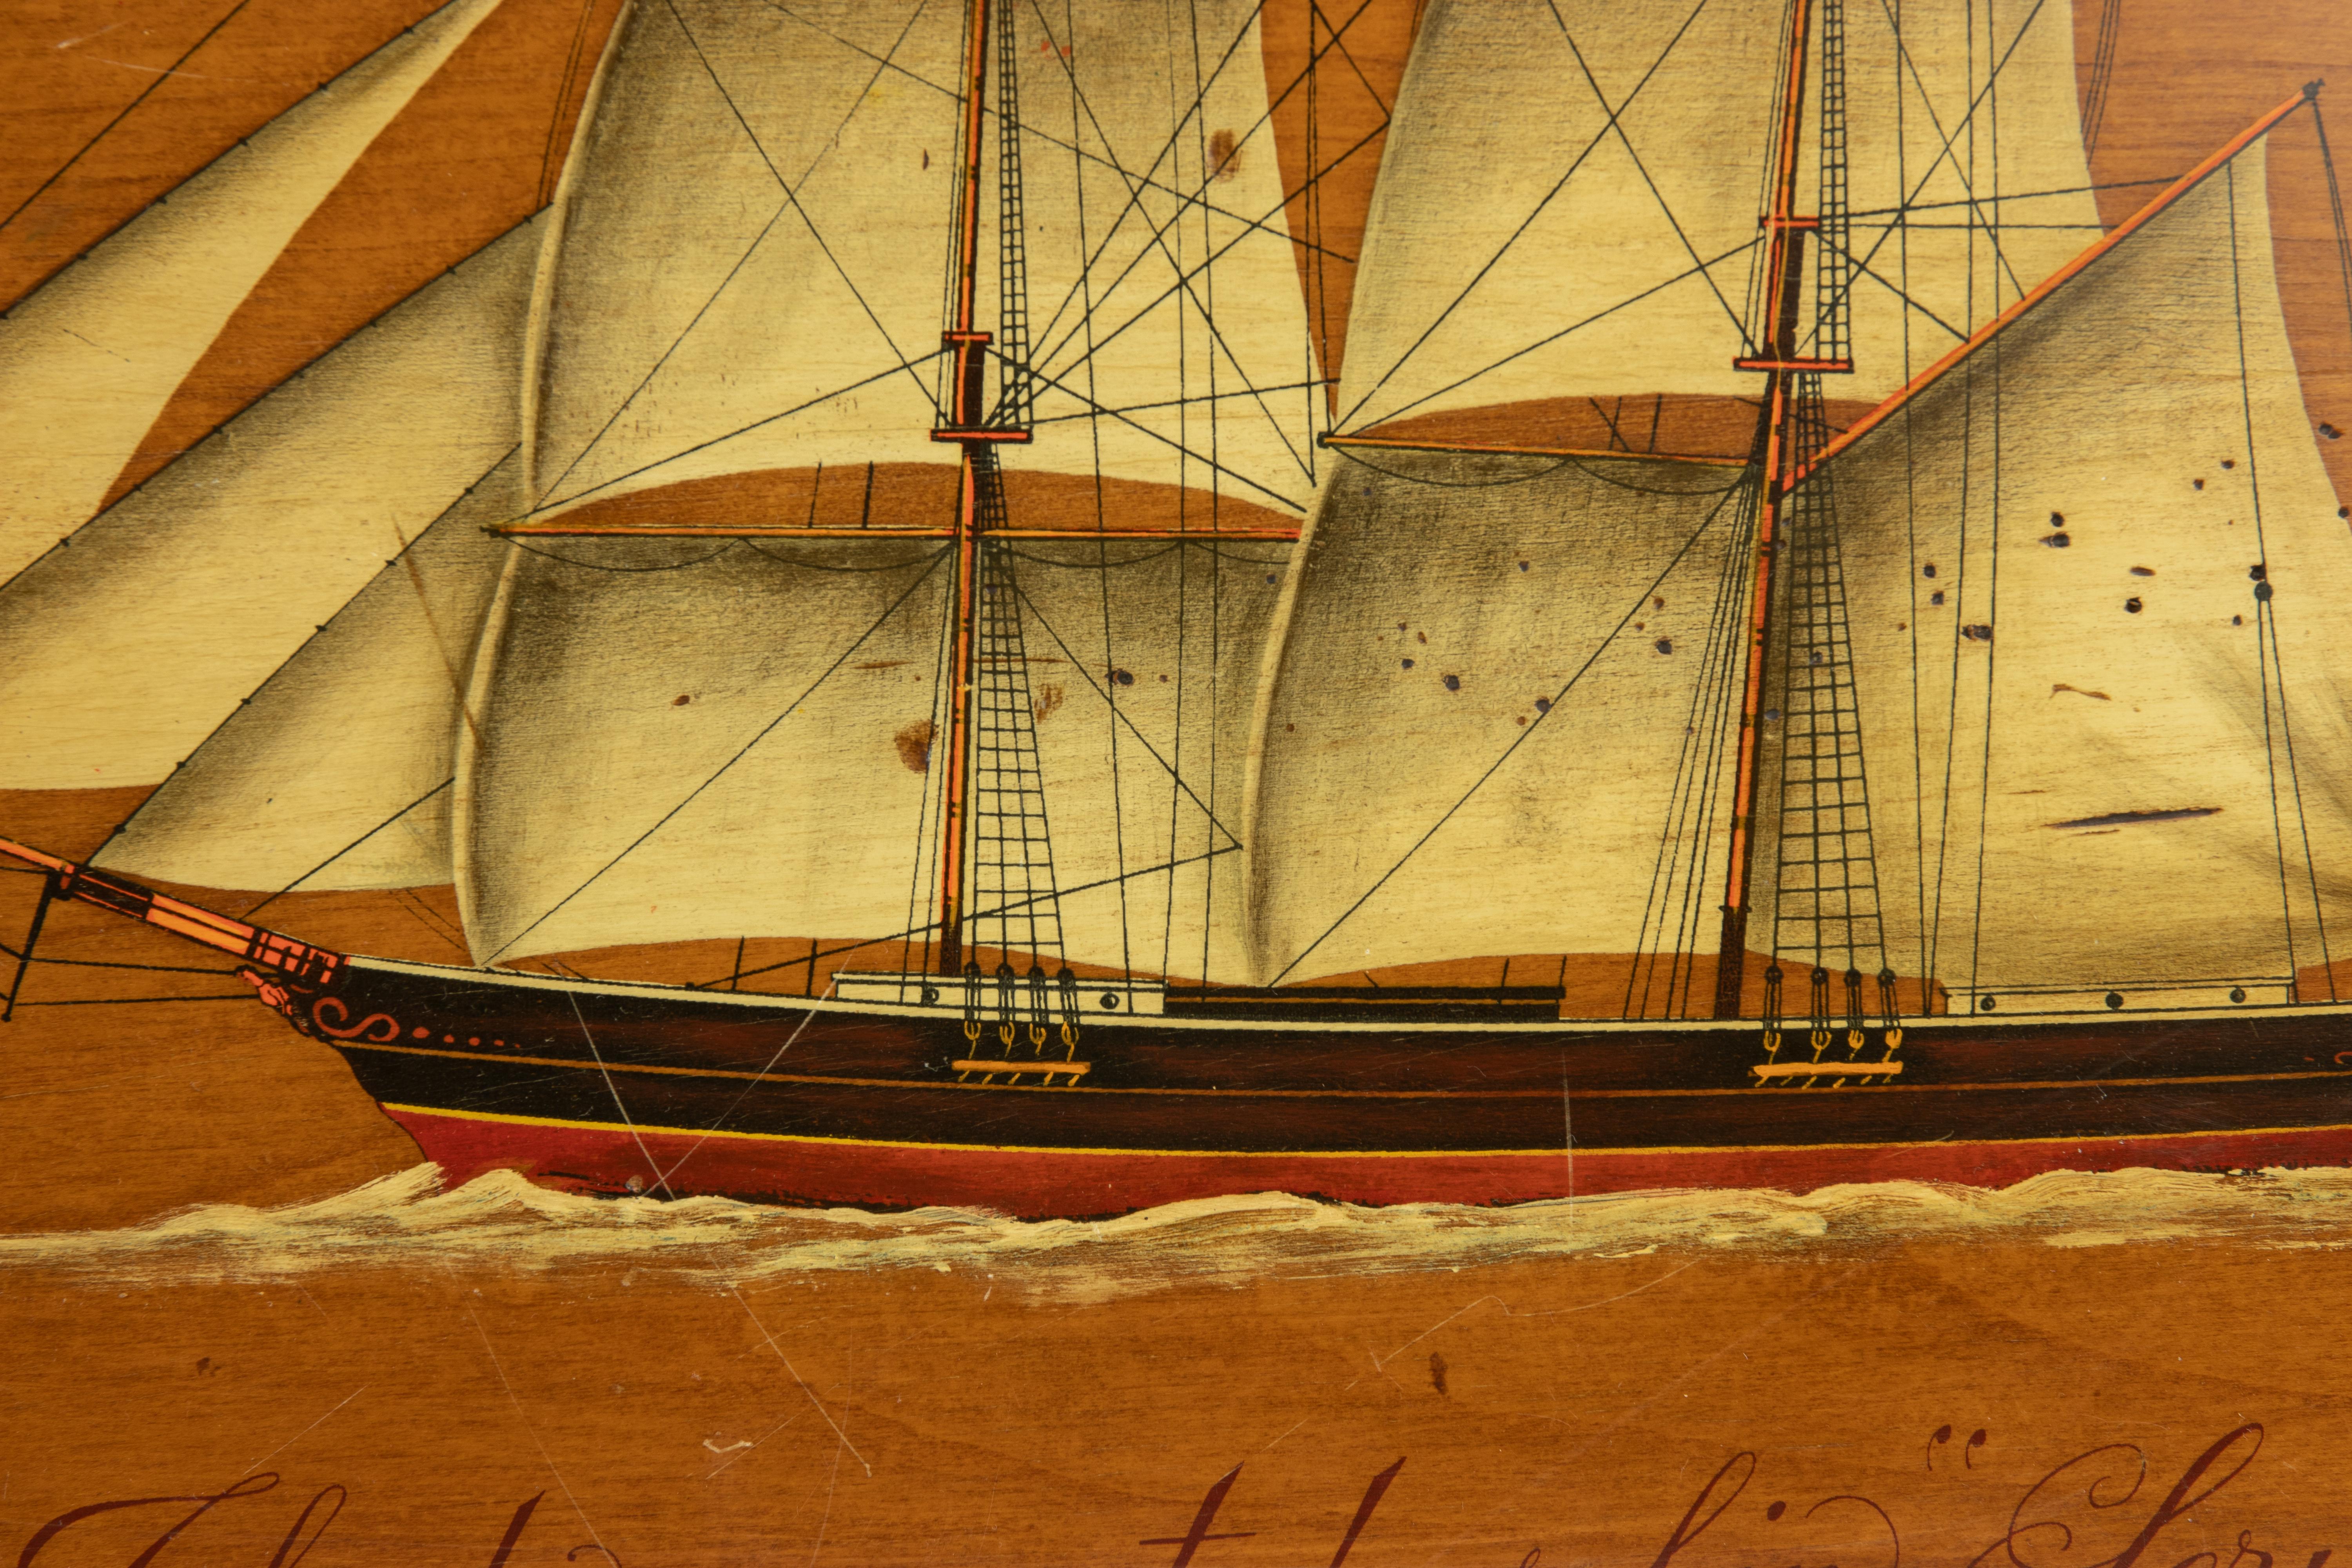 The Two Masted Schip Serica, Tempera Painting on Wood, Mid-20th Century. 

The Serica was a clipper built in 1863 by Robert Steele & Co., at Greenock on the south bank of the Clyde, Scotland, for James Findlay. 

35 x 45 cm.

Good conditions!